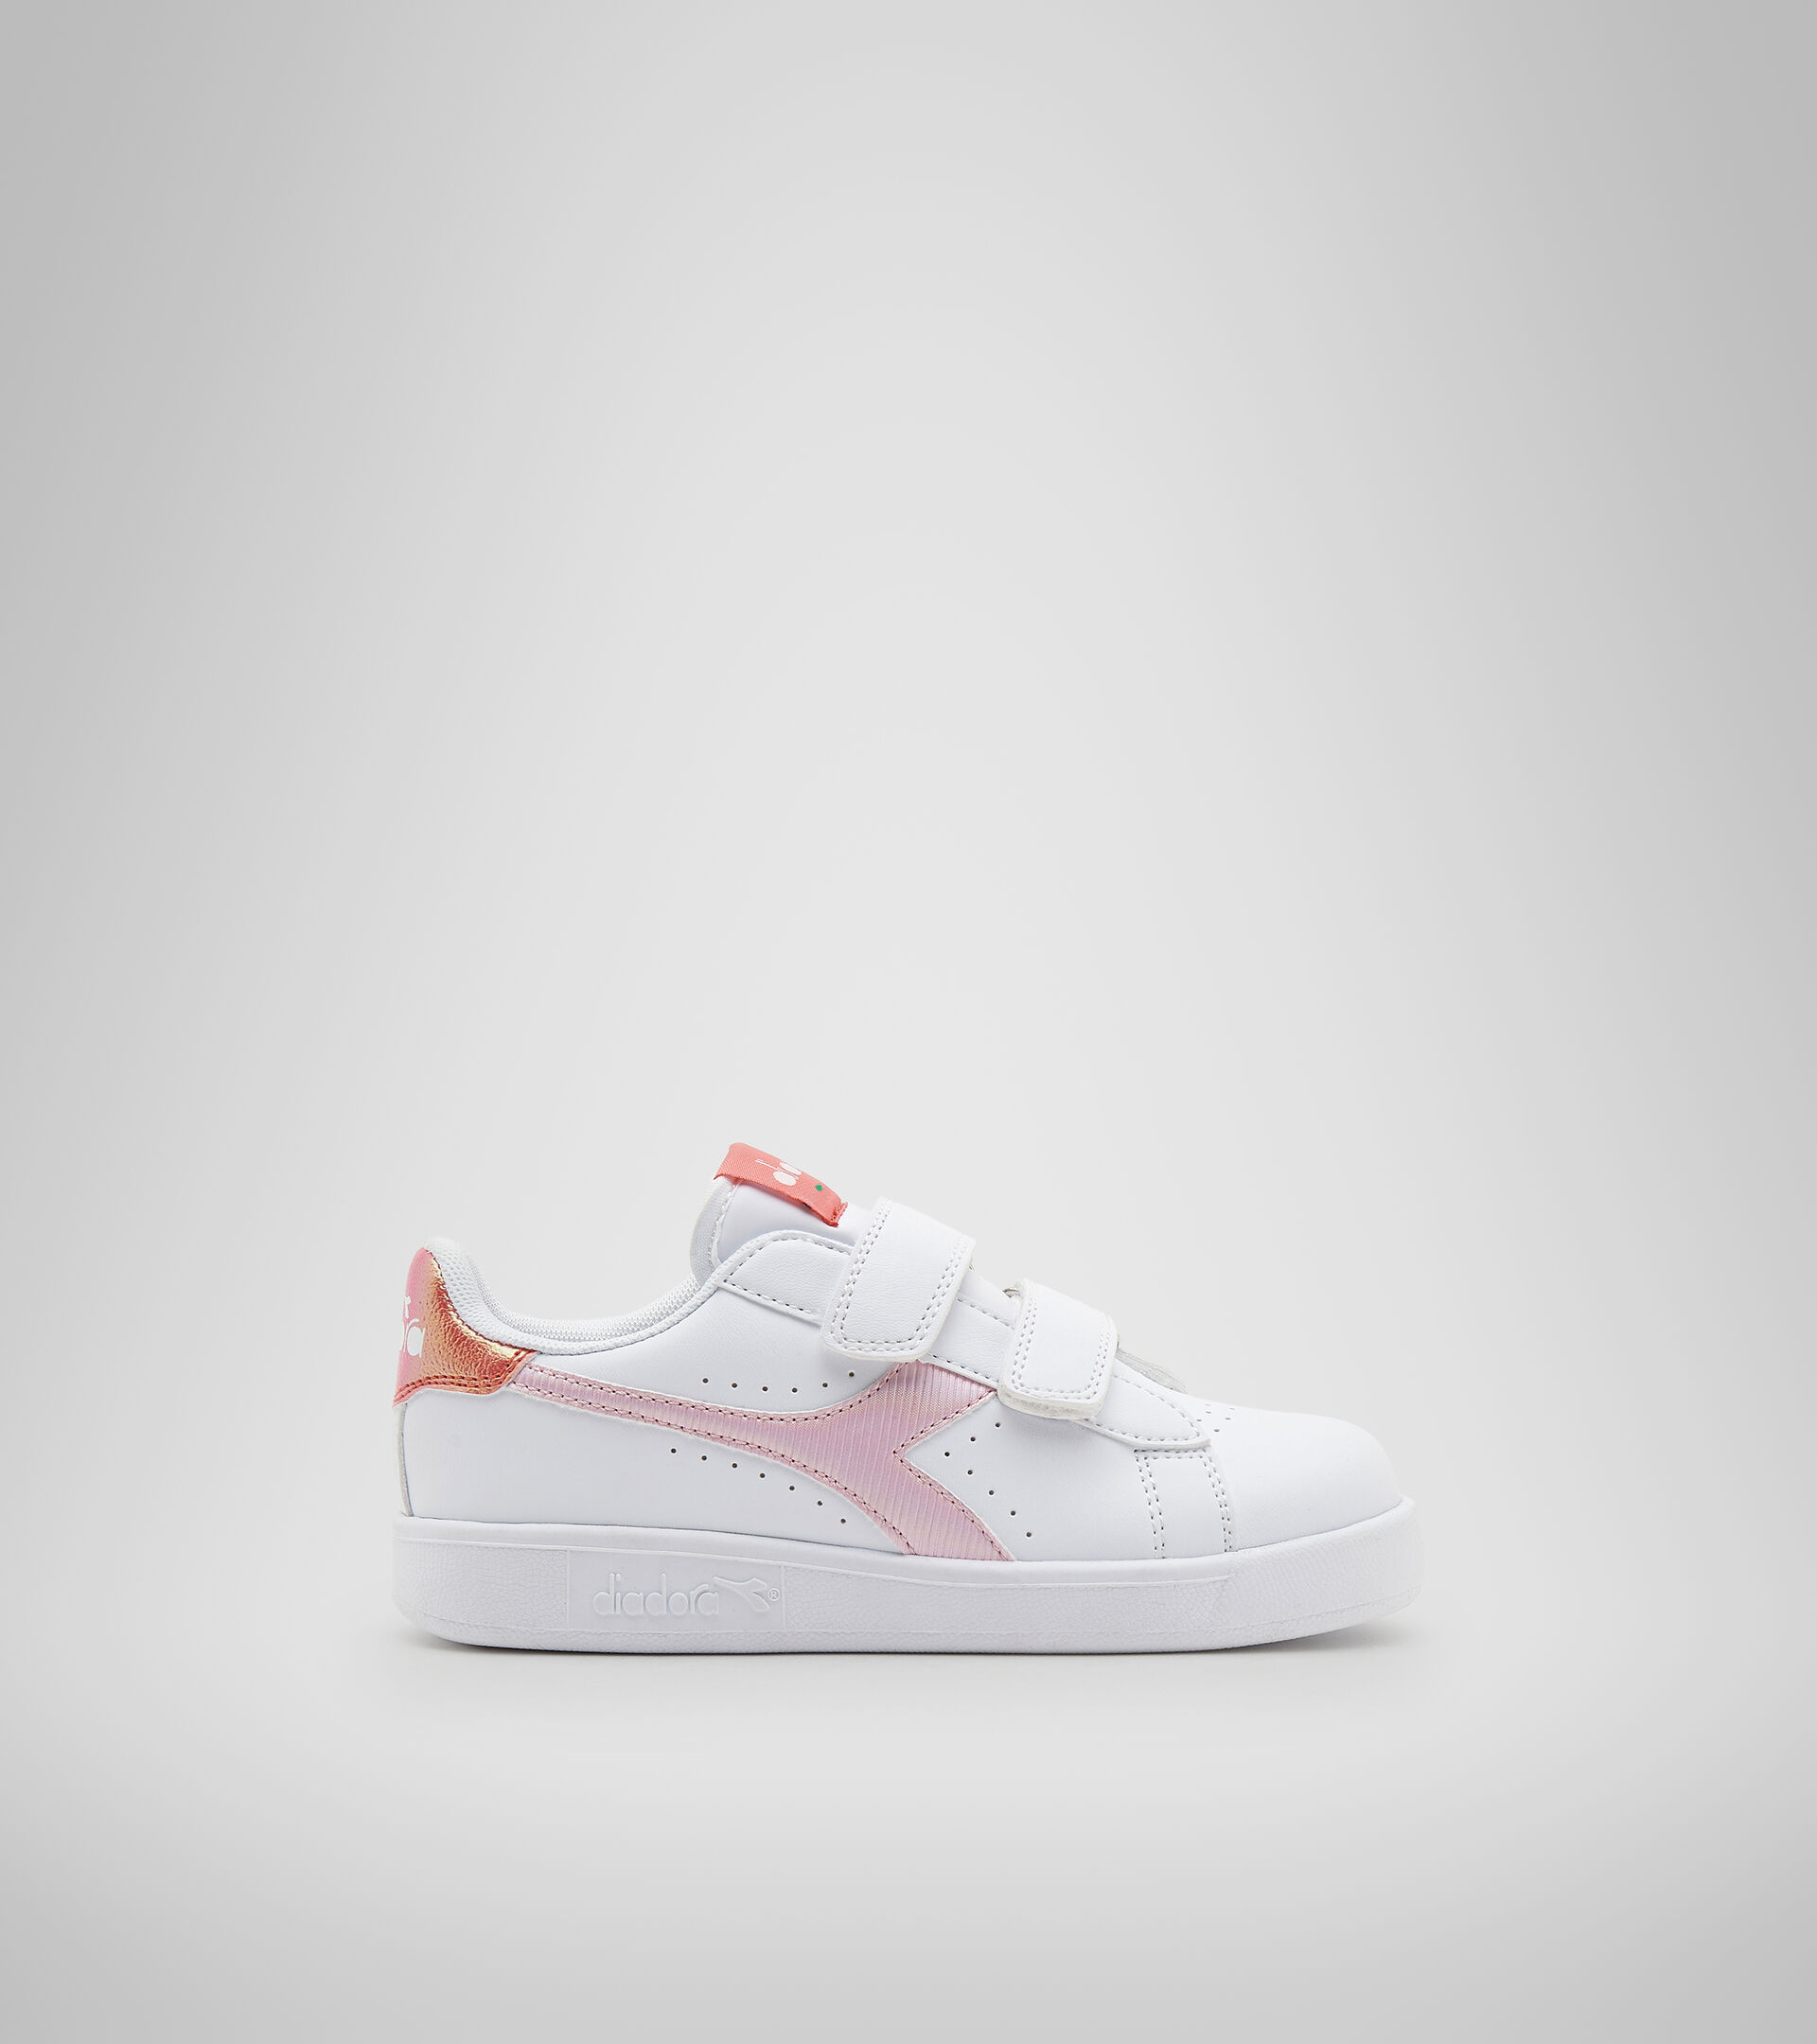 Donder Hol Tub GAME P PS GIRL Sports shoes - Kids 4-8 years - Diadora Online Store US